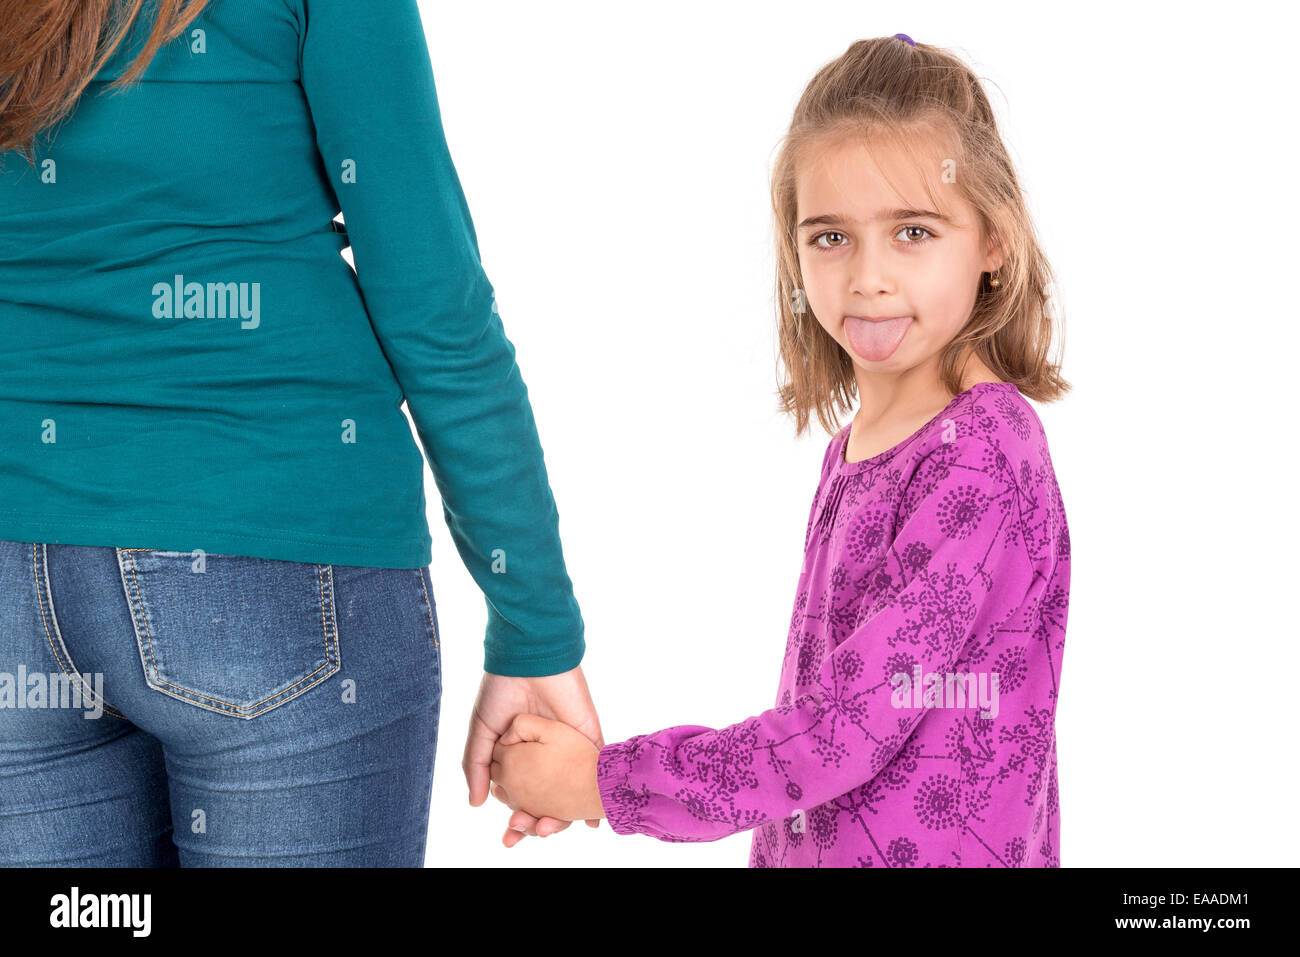 Young girl making faces and holding her mother's hand Stock Photo